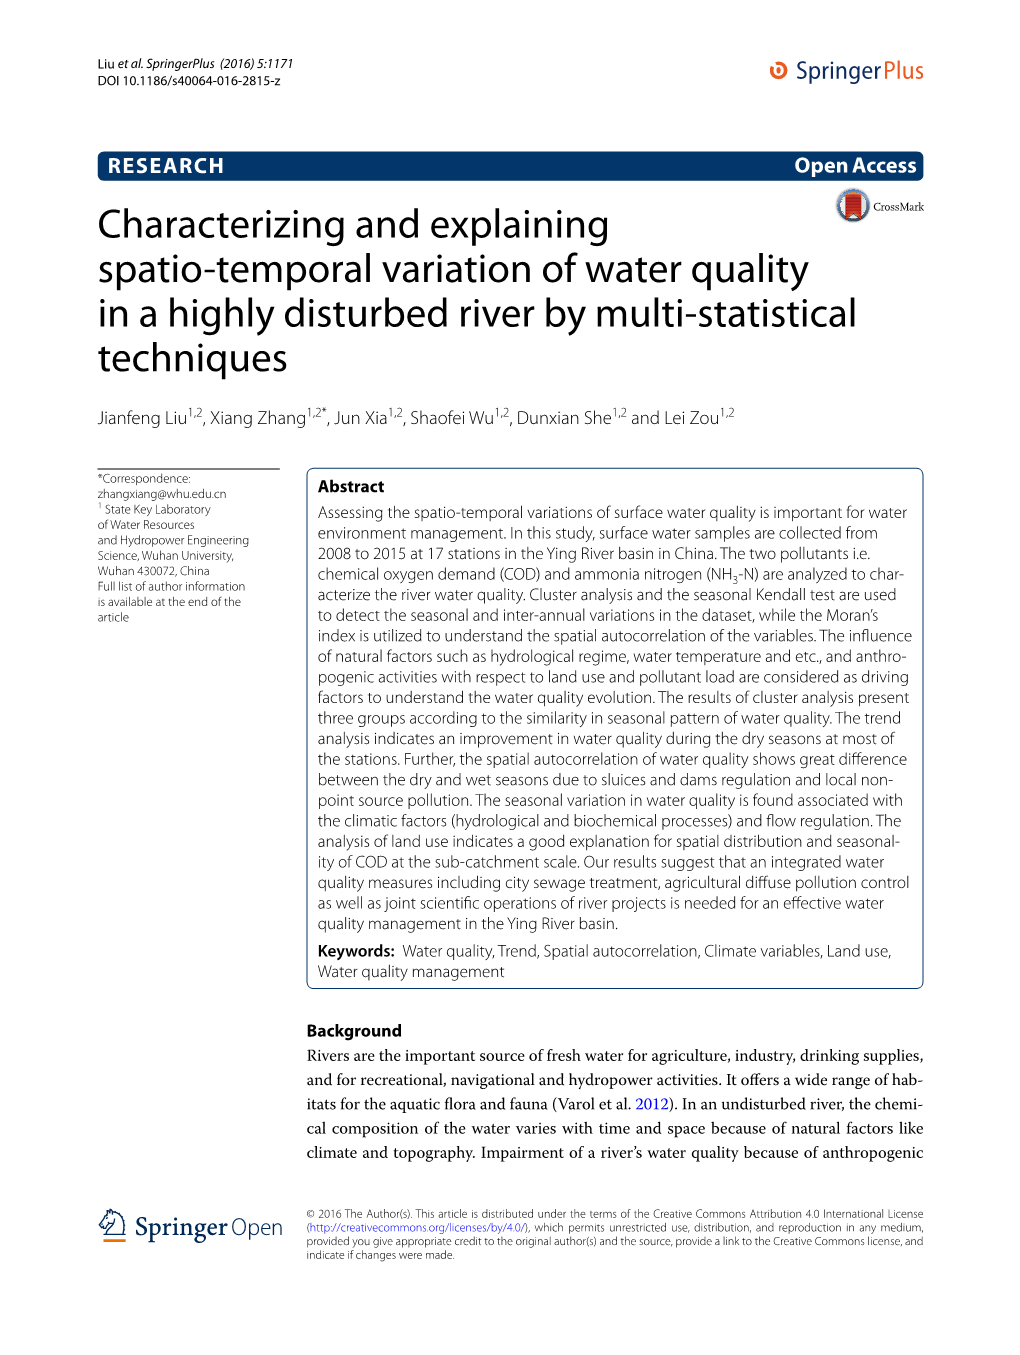 Characterizing and Explaining Spatio-Temporal Variation of Water